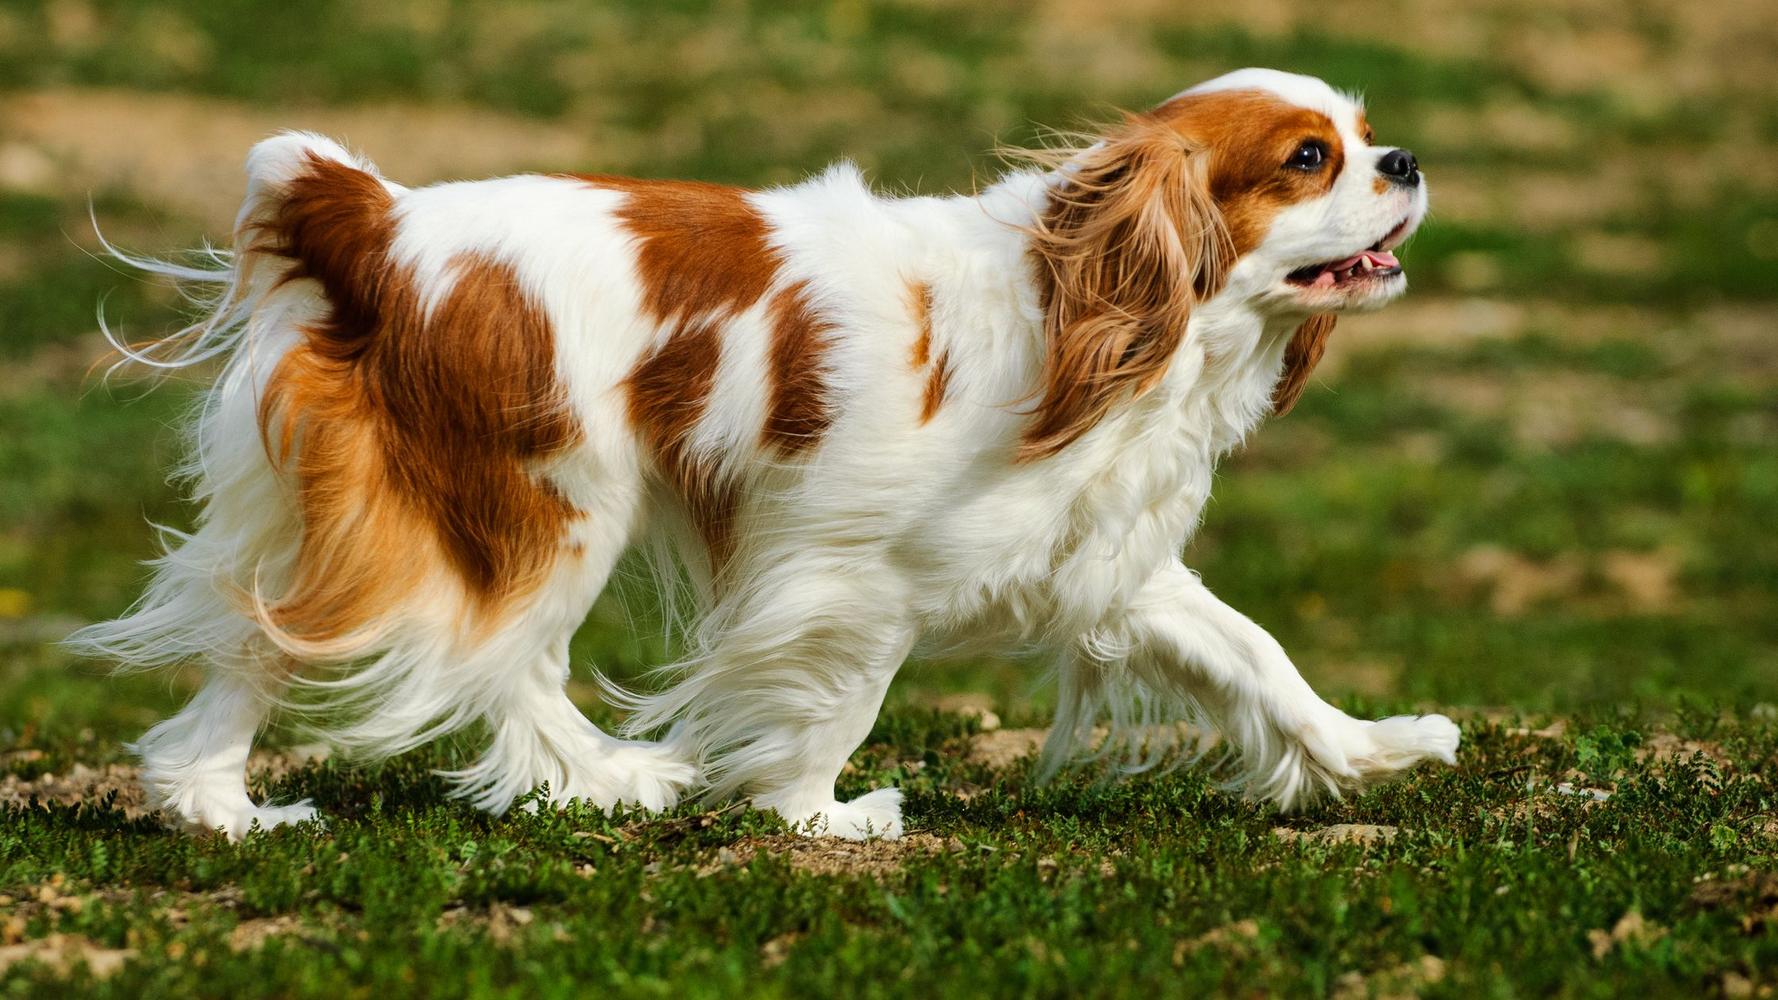 Cavalier King Charles Puppies for Sale - Florida Fur Babies